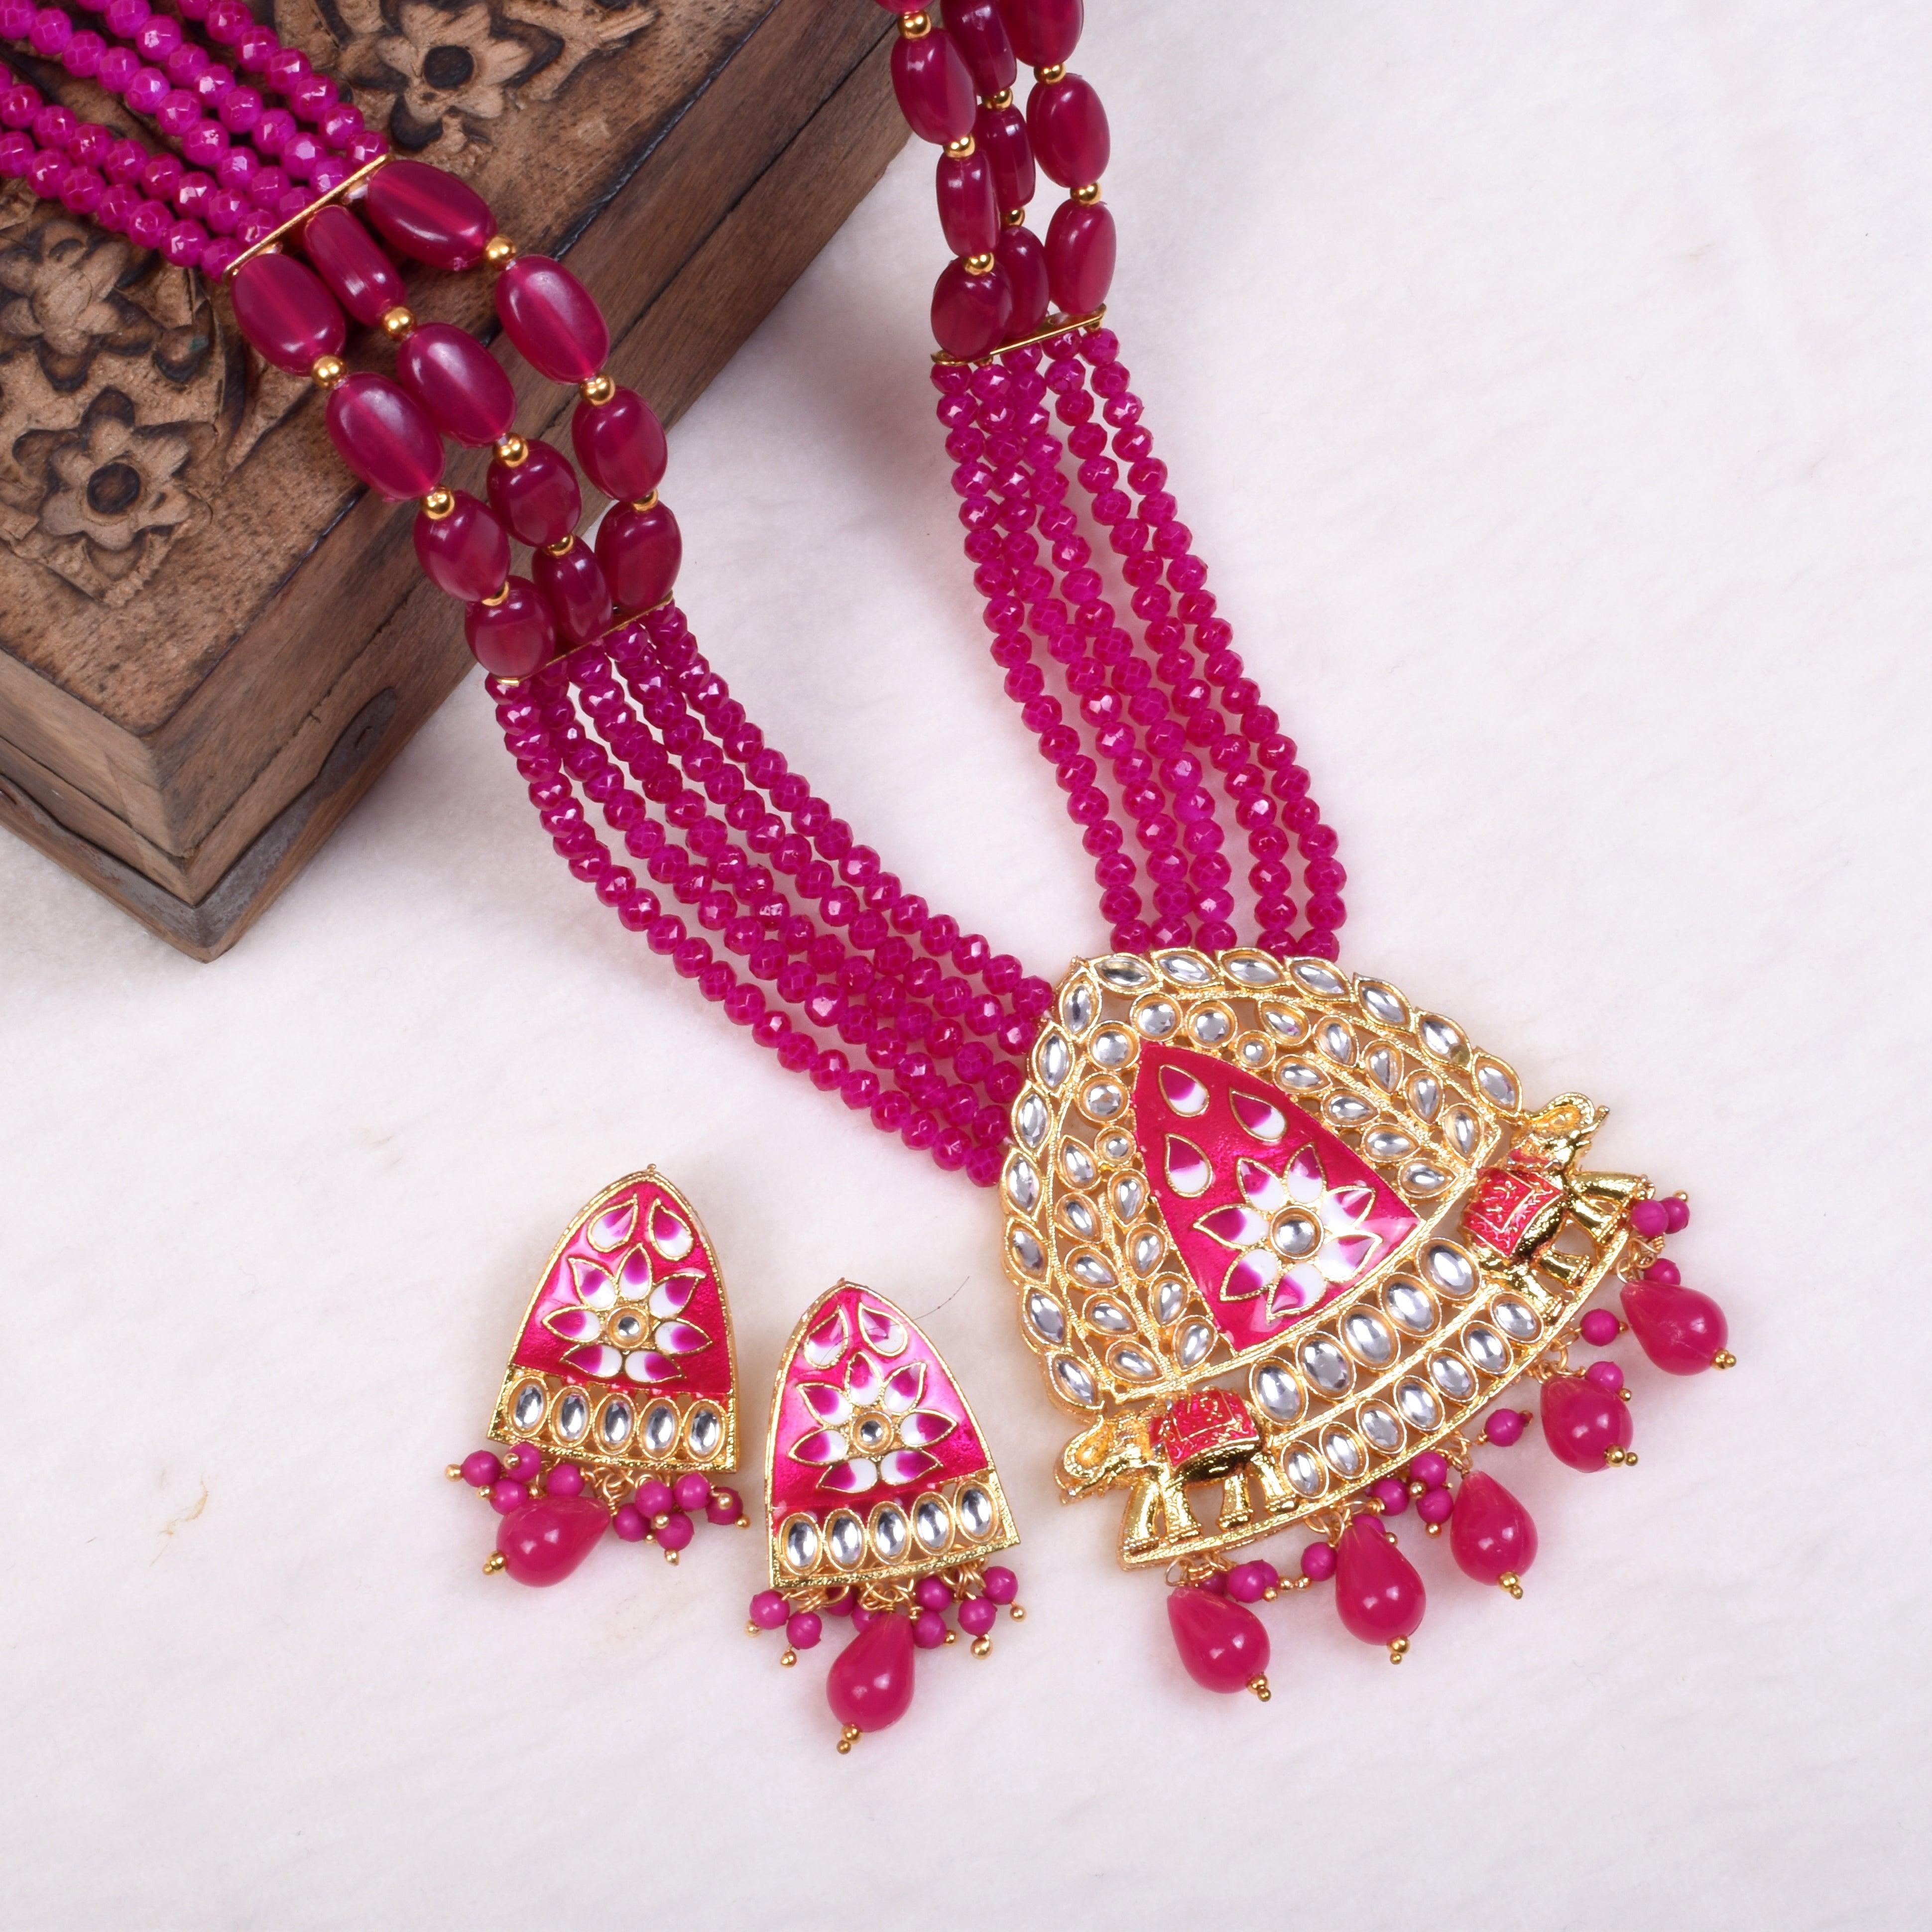 Designer Multi Layer Beads Necklace » Buy online from